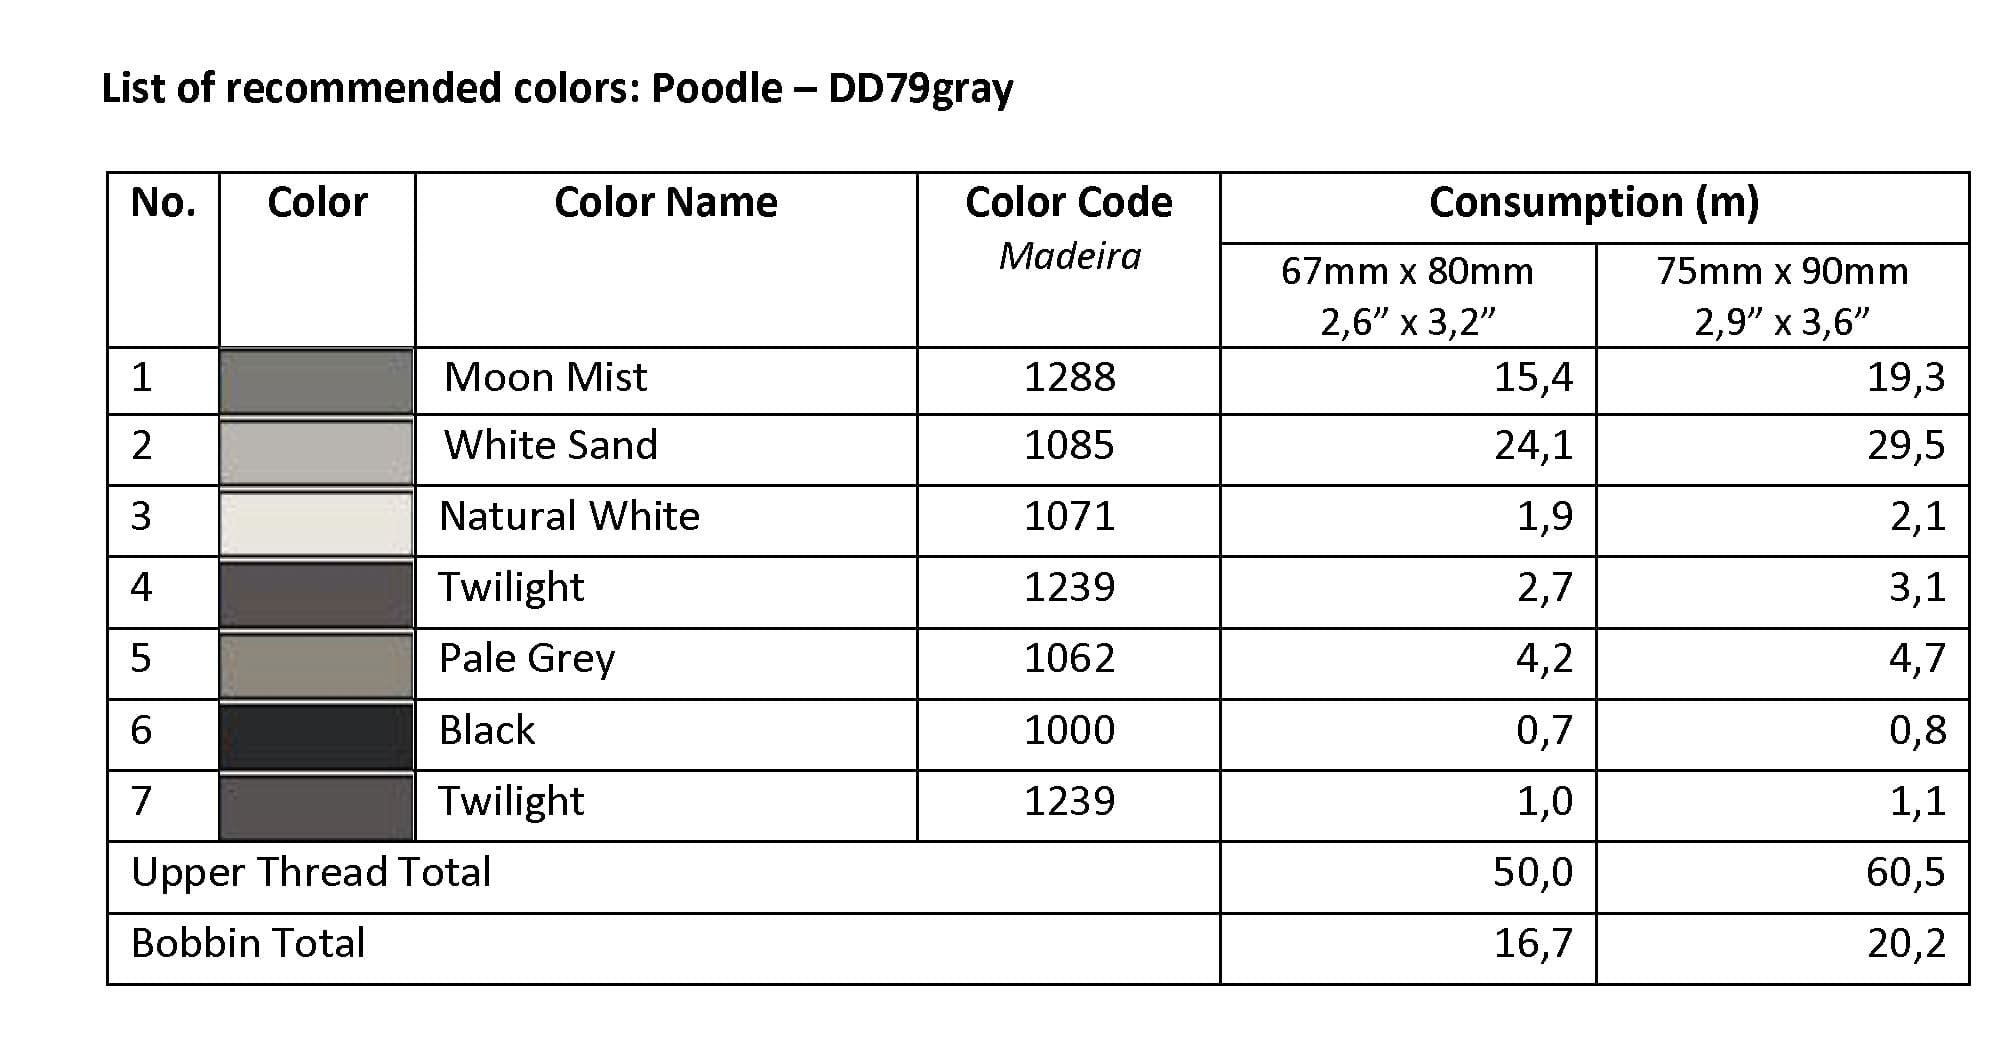 List of Recommended Colors -  Poodle DD79 gray